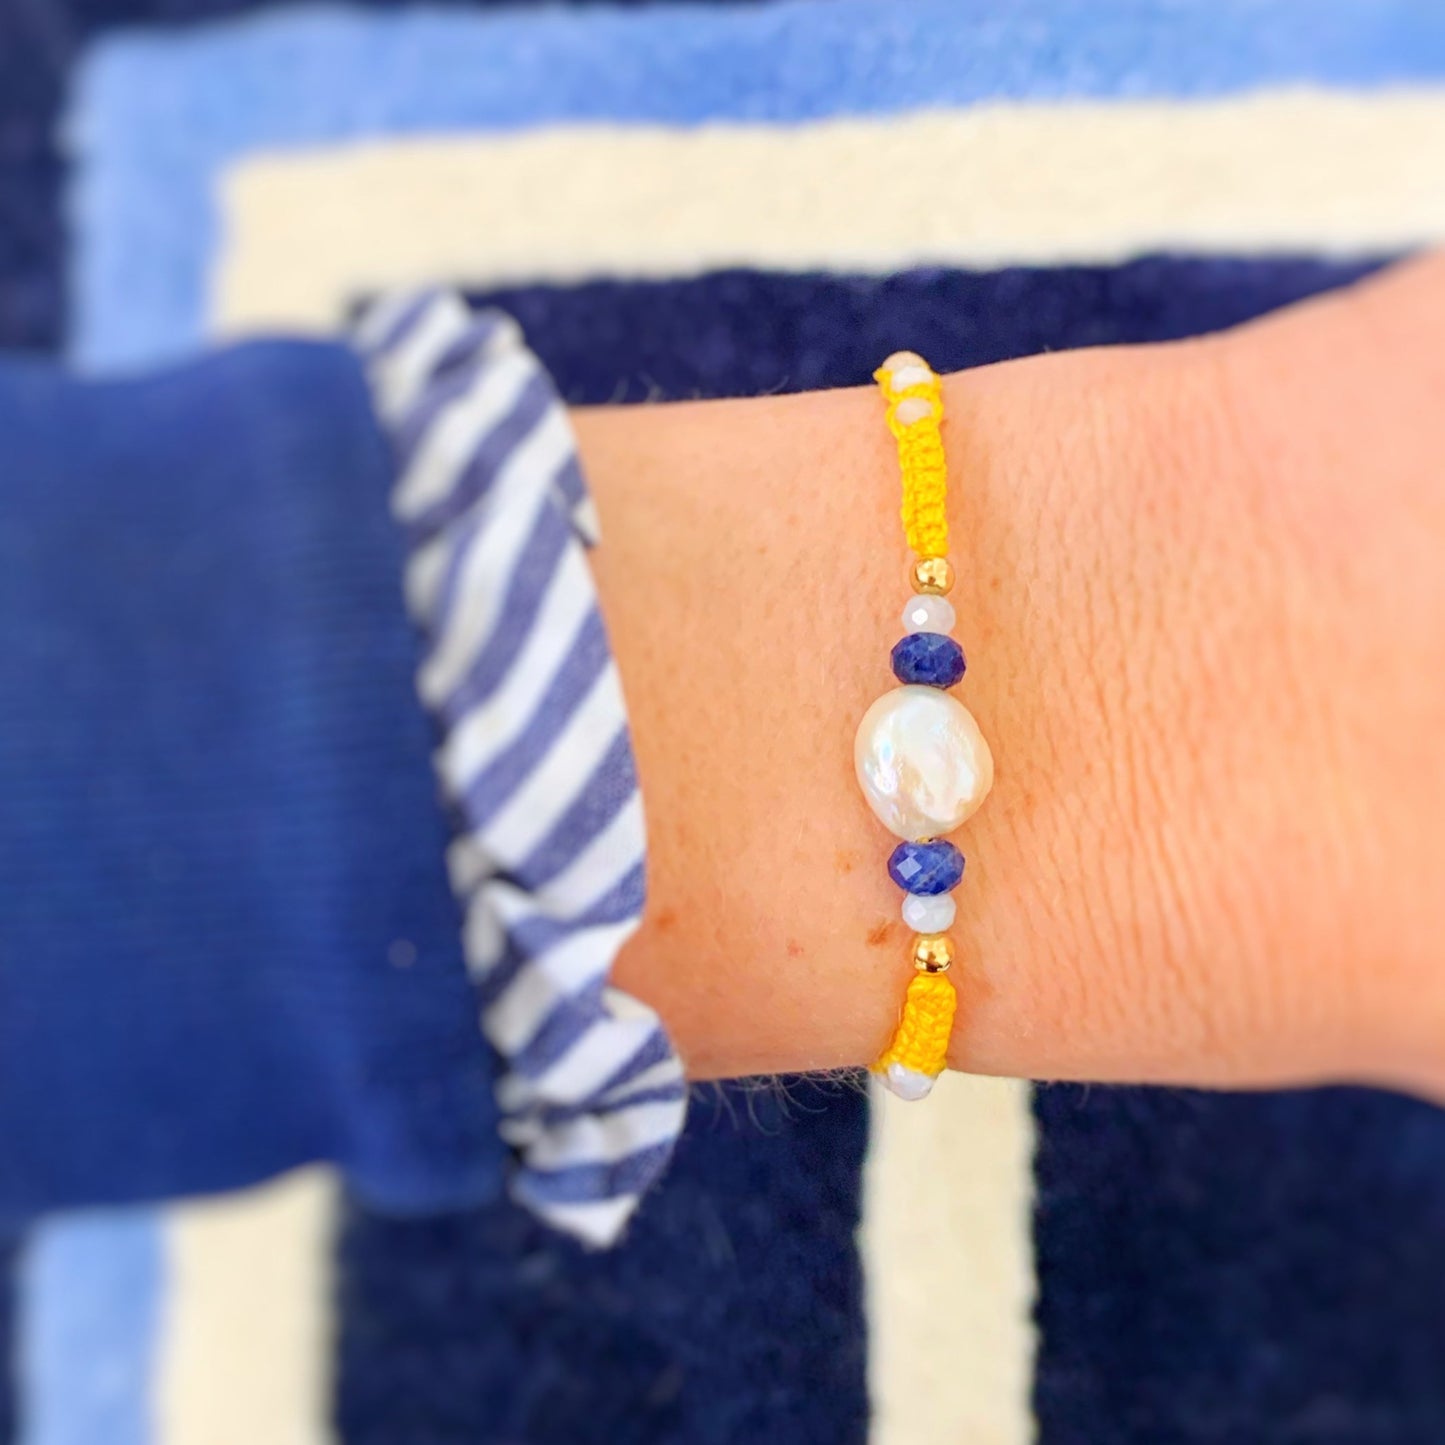 A photo of the bristol buttercup macrame yellow adjustable friendship bracelet worn on a wrist over a navy blue backdrop